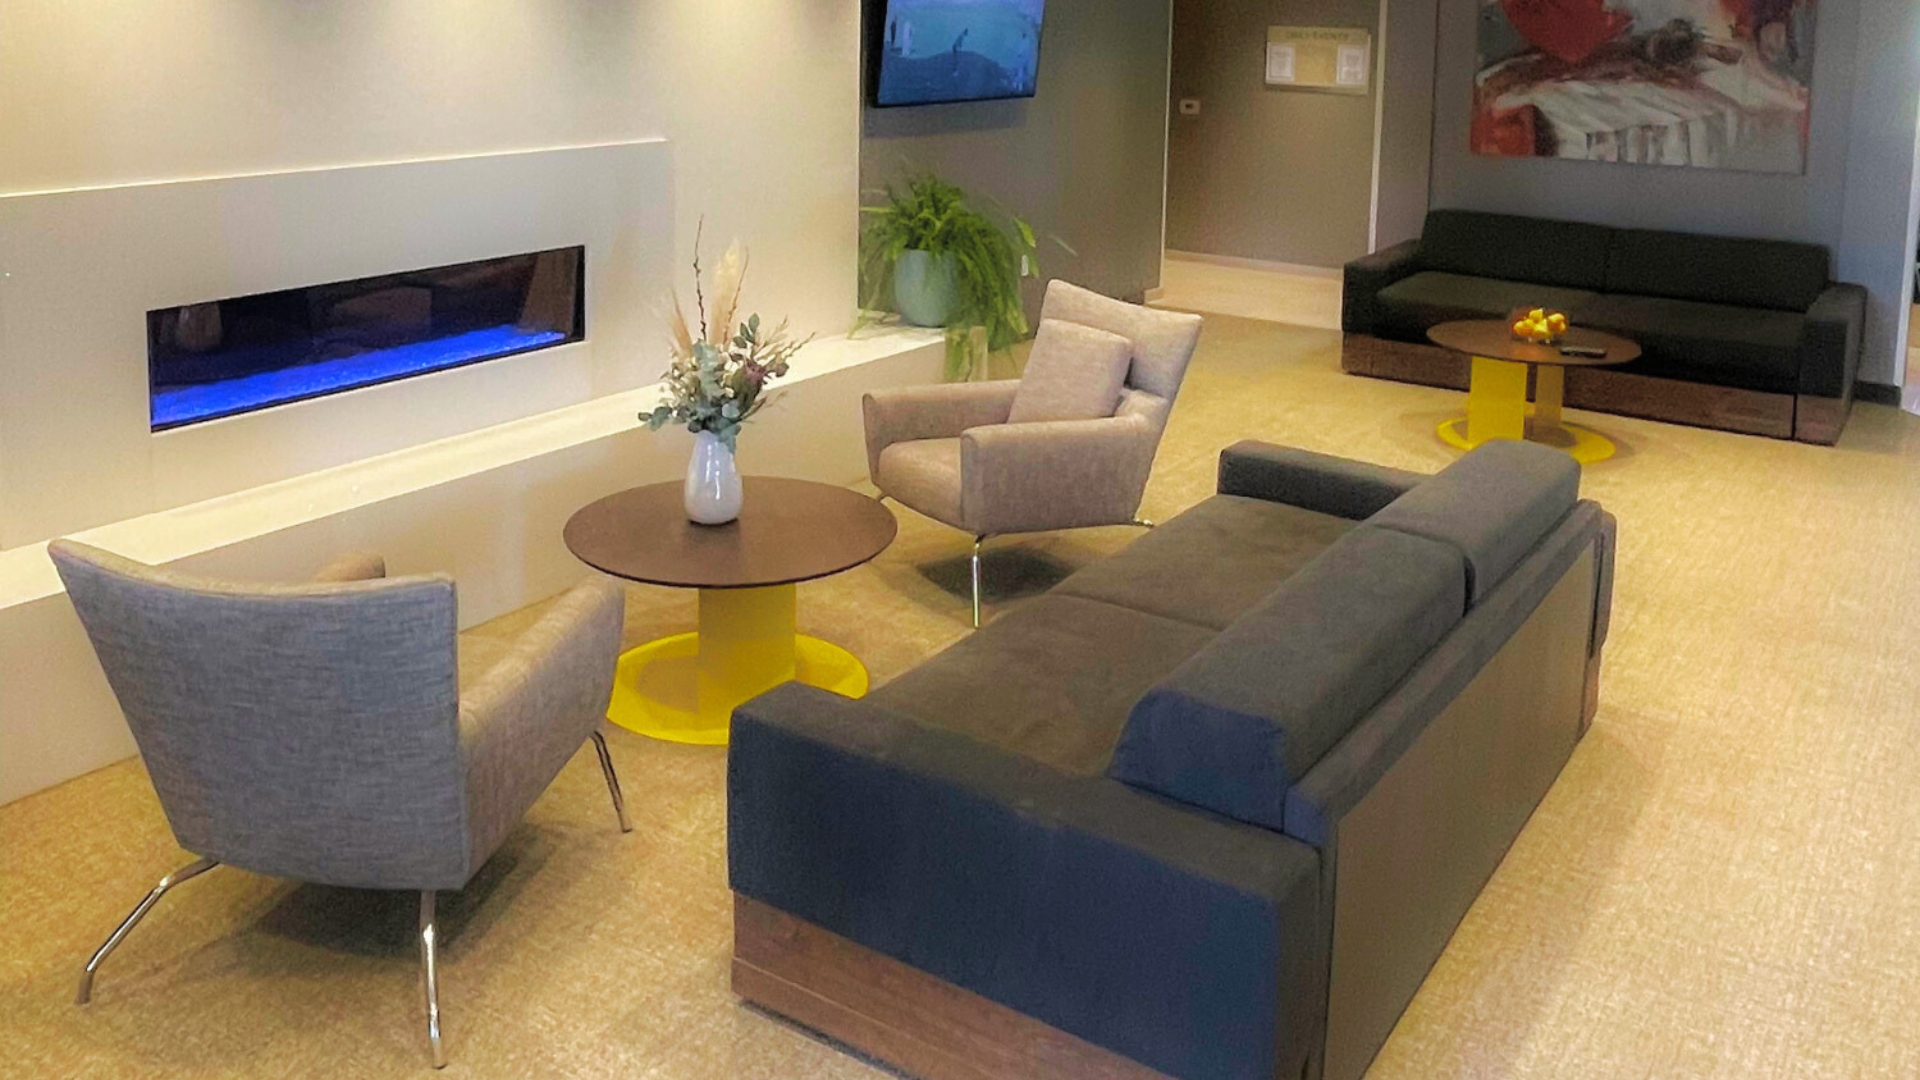 Lobby area with a fireplace and gray couches.